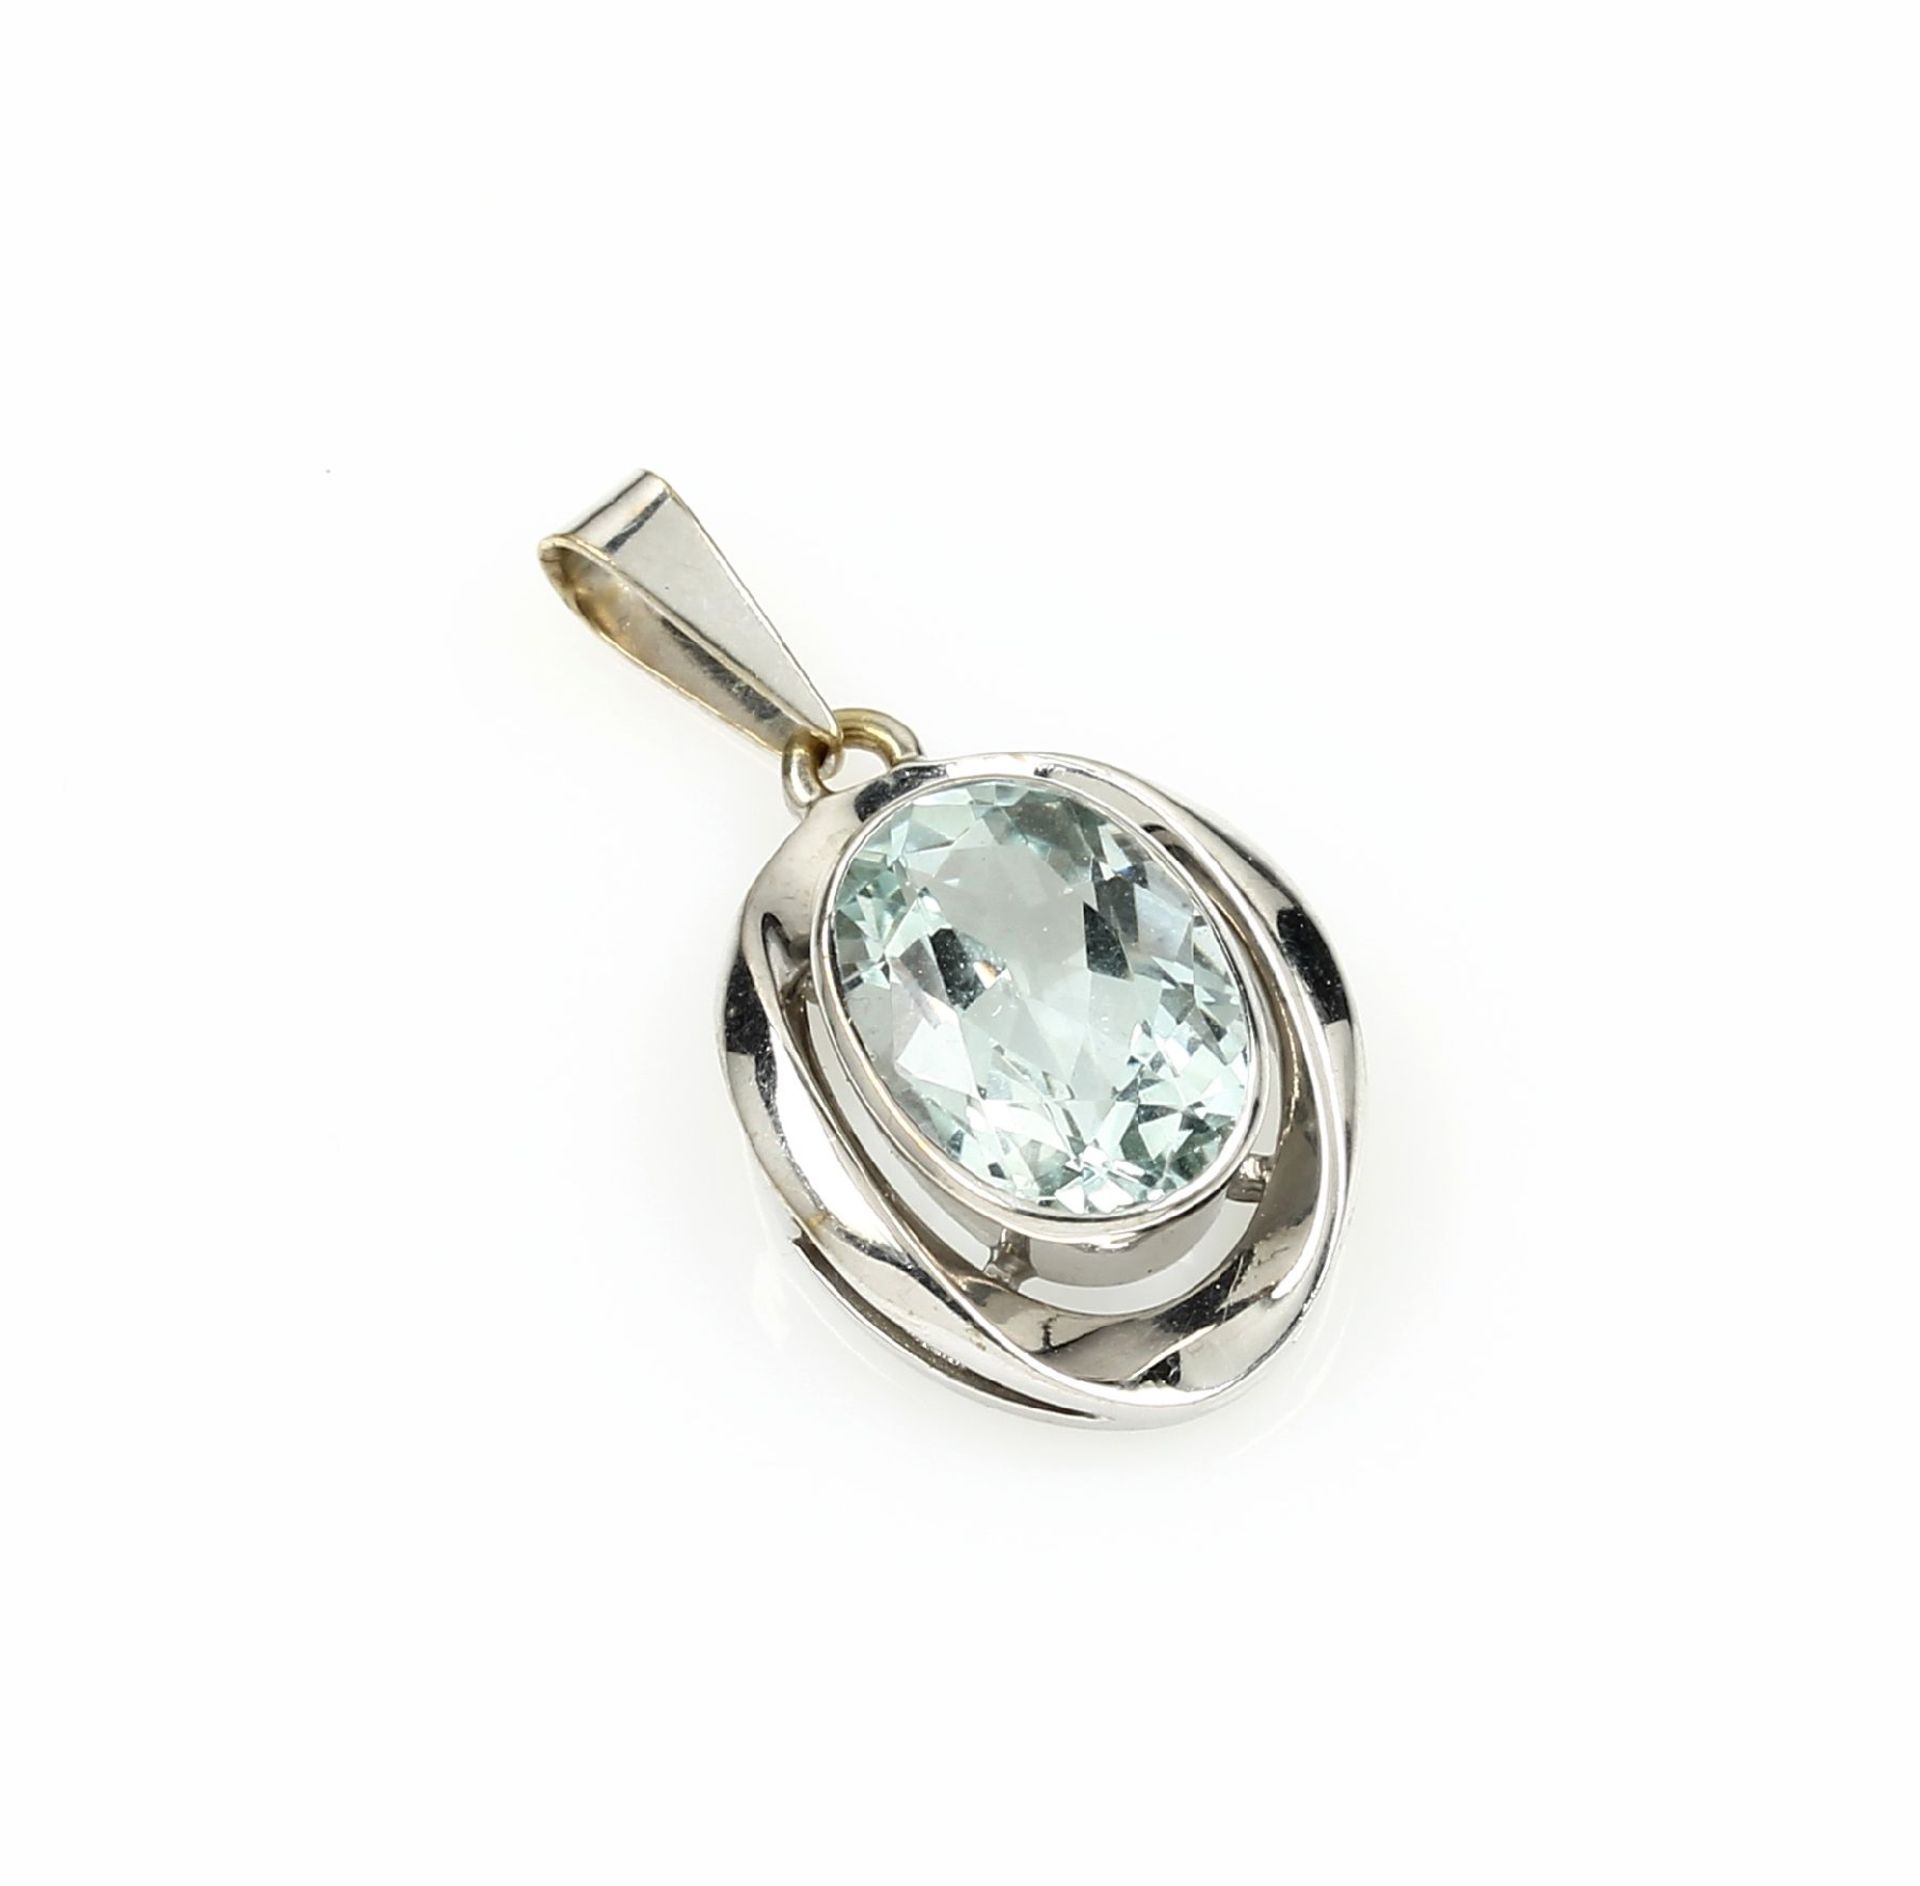 14 kt gold pendant with aquamarine , WG 585/000, oval bevelled aquamarine approx. 4.0 ct, approx.